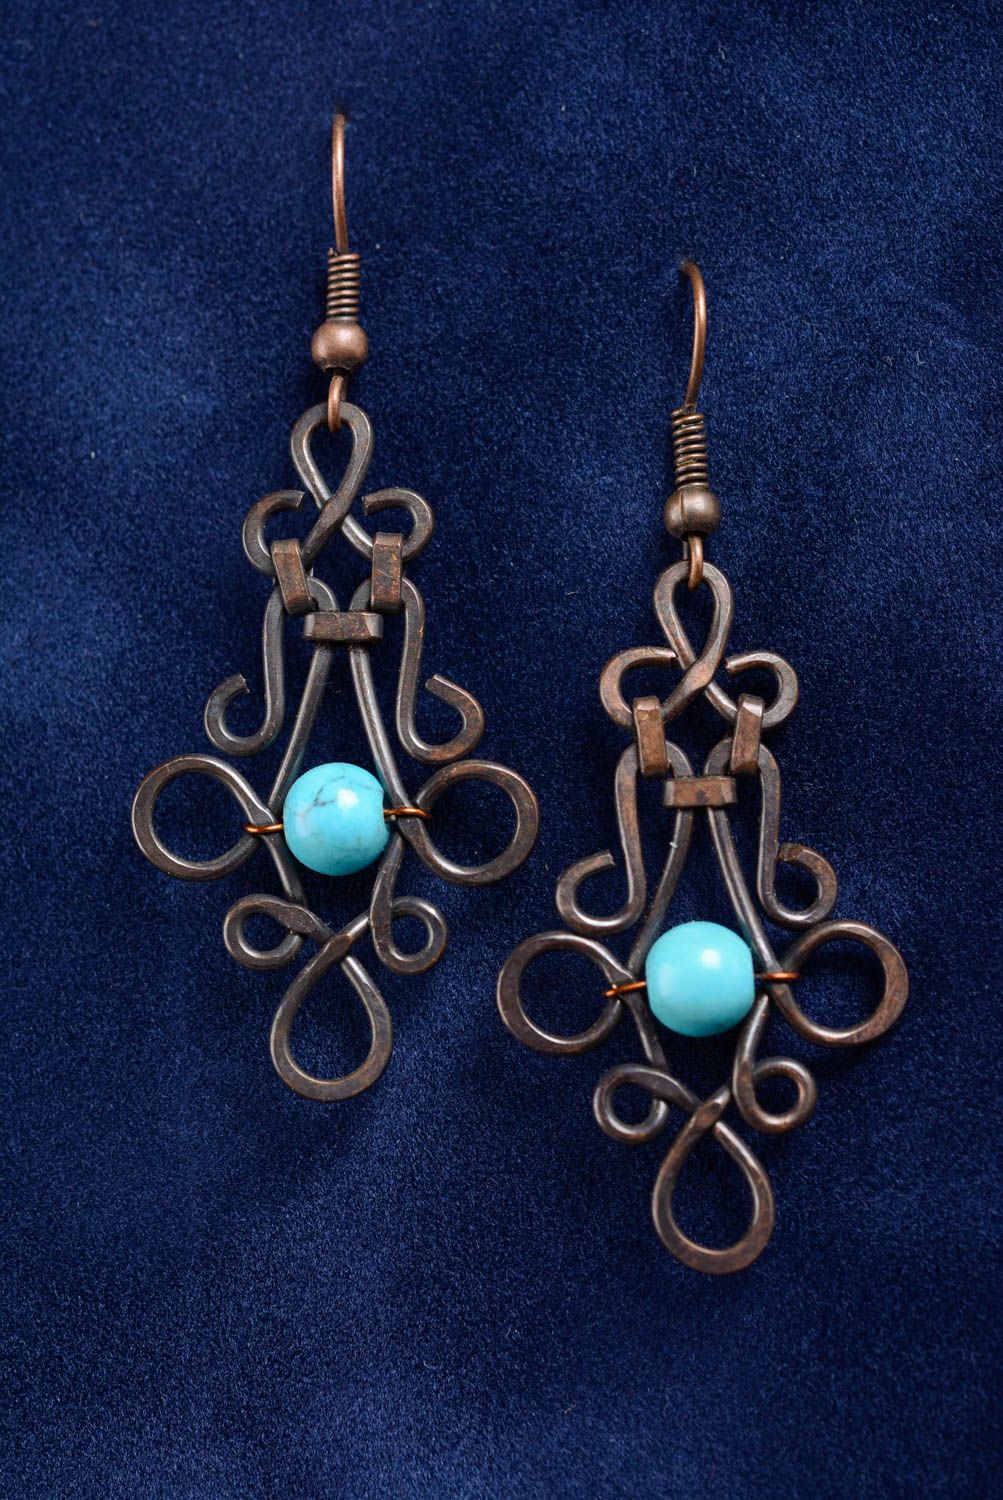 Massive earrings made of copper using wire wrap technique with artificial turquoise photo 1